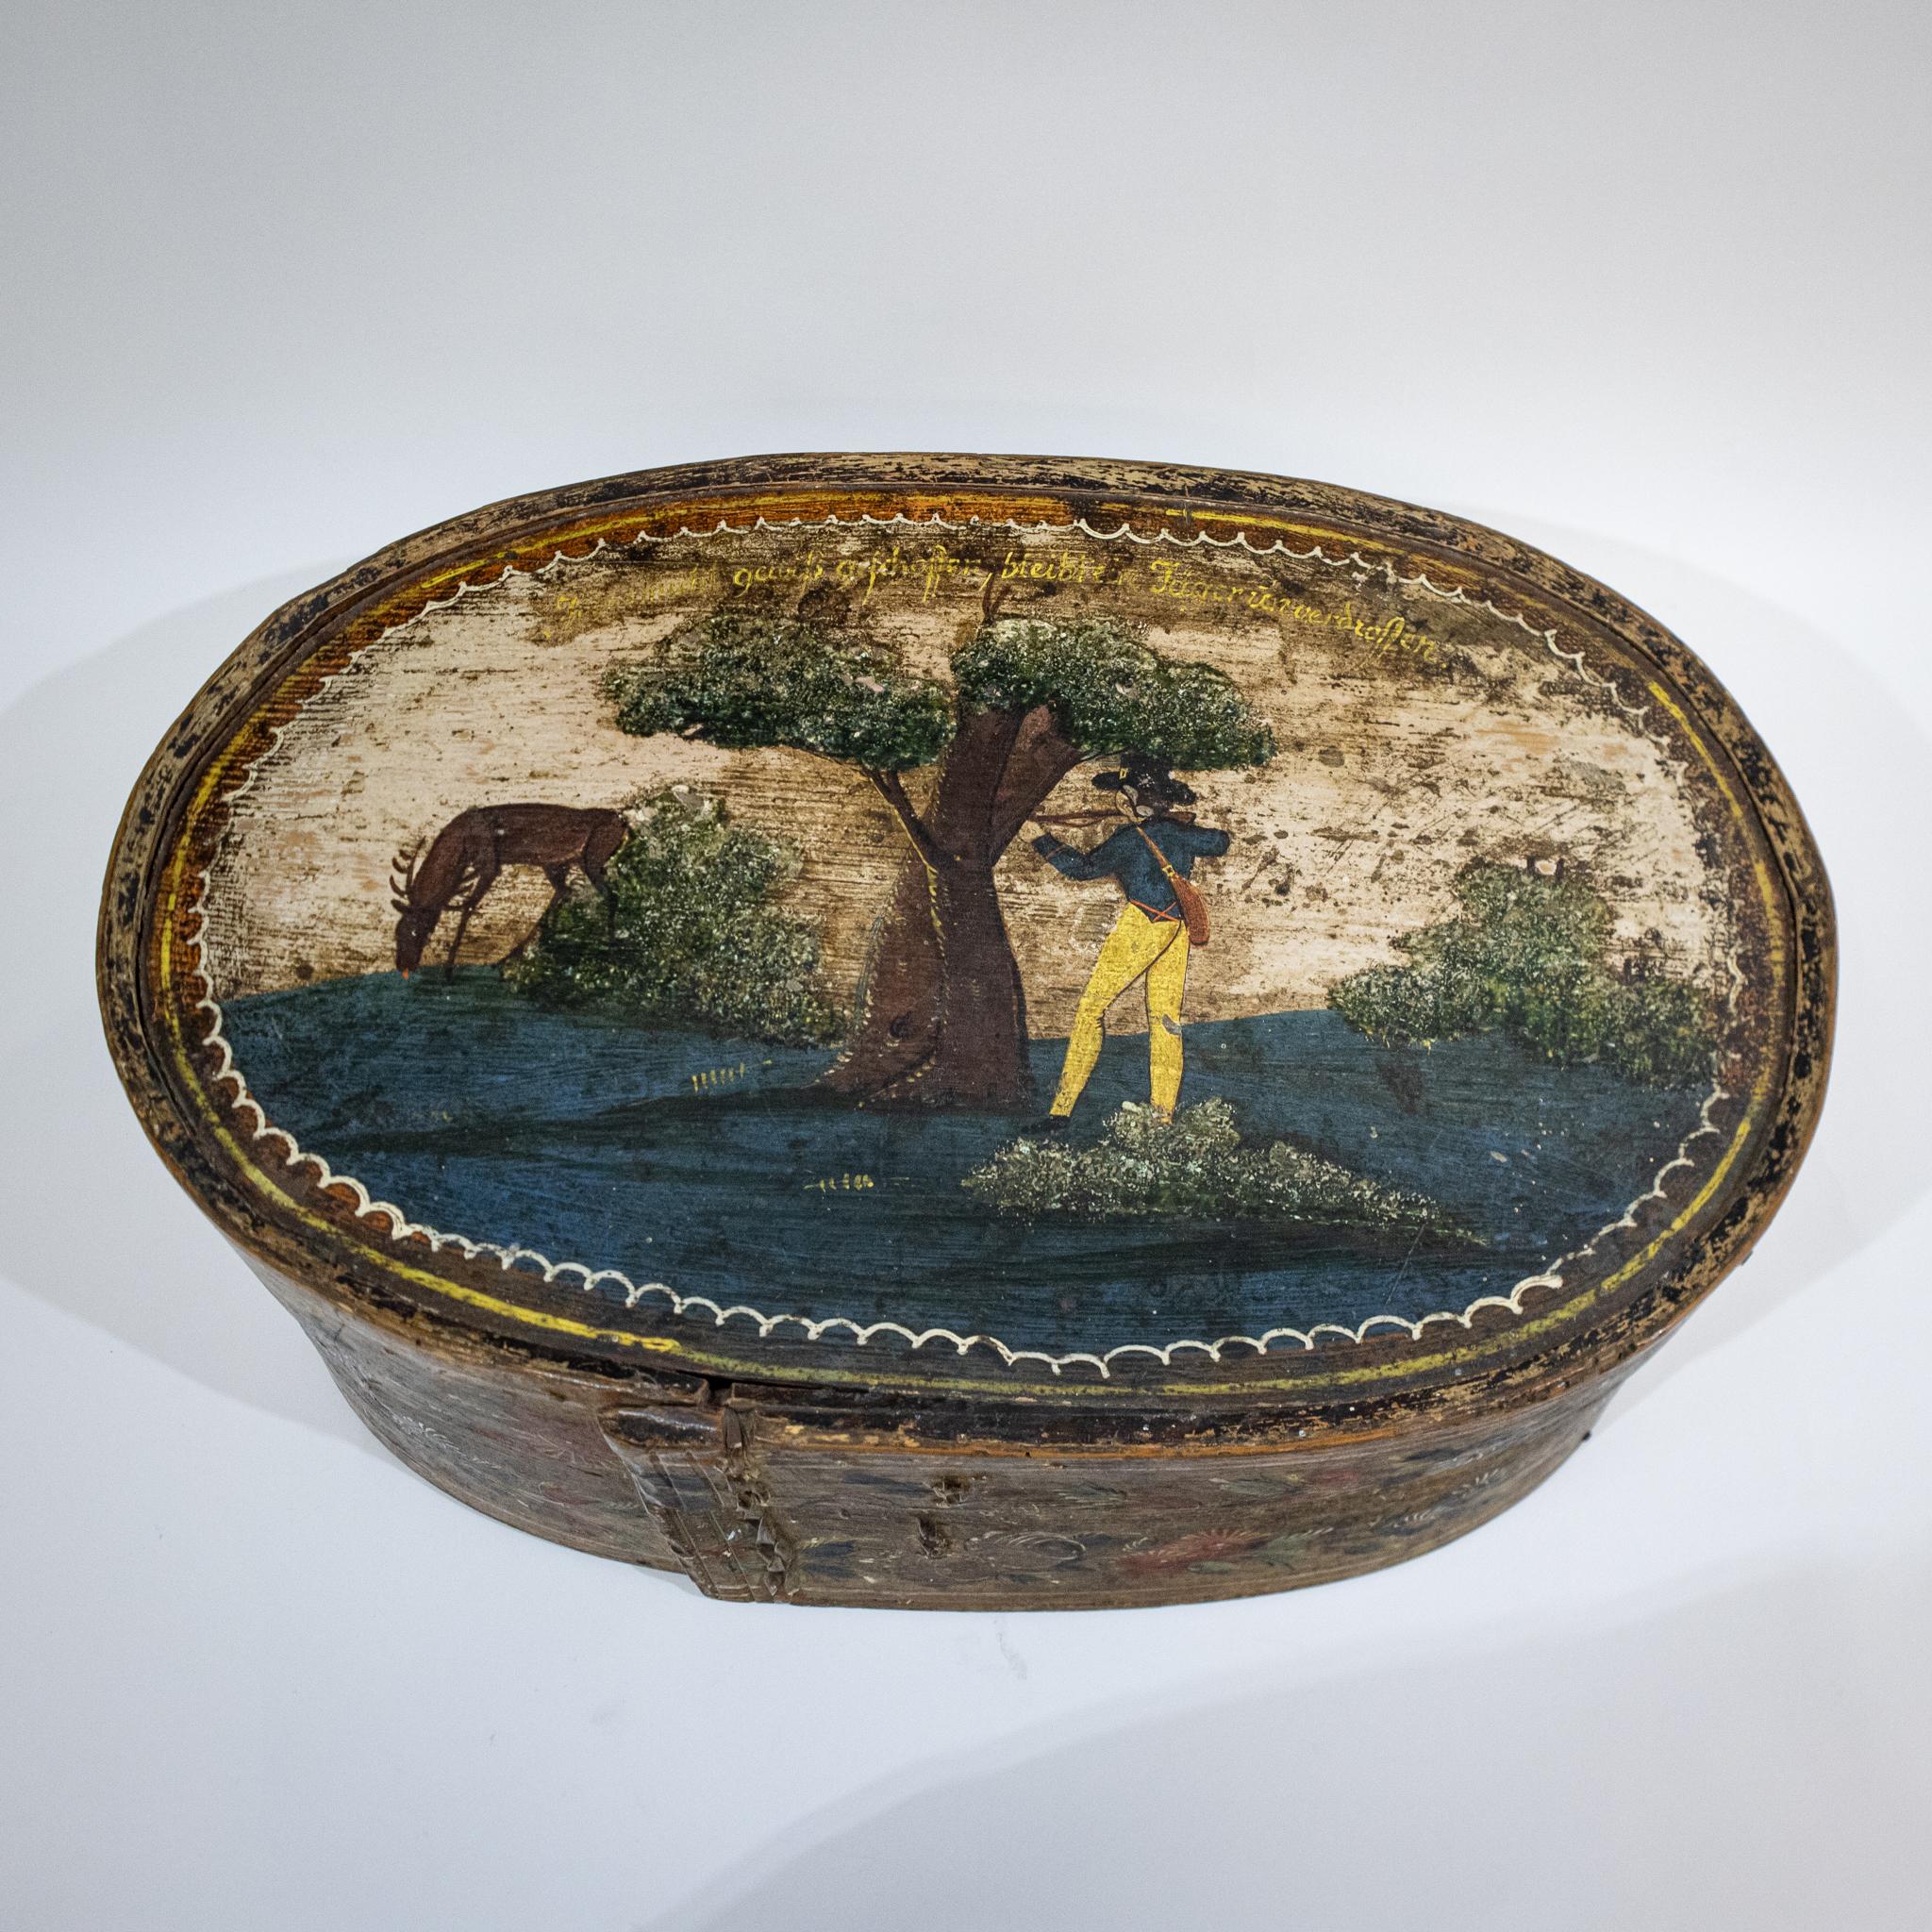 A lovely piece of Continental European folk art, this oval bentwood box has been painted with a landscape scene showing a huntsman with a rifle aiming at a stag or deer from behind a tree. There is some yellow text written in German around the top